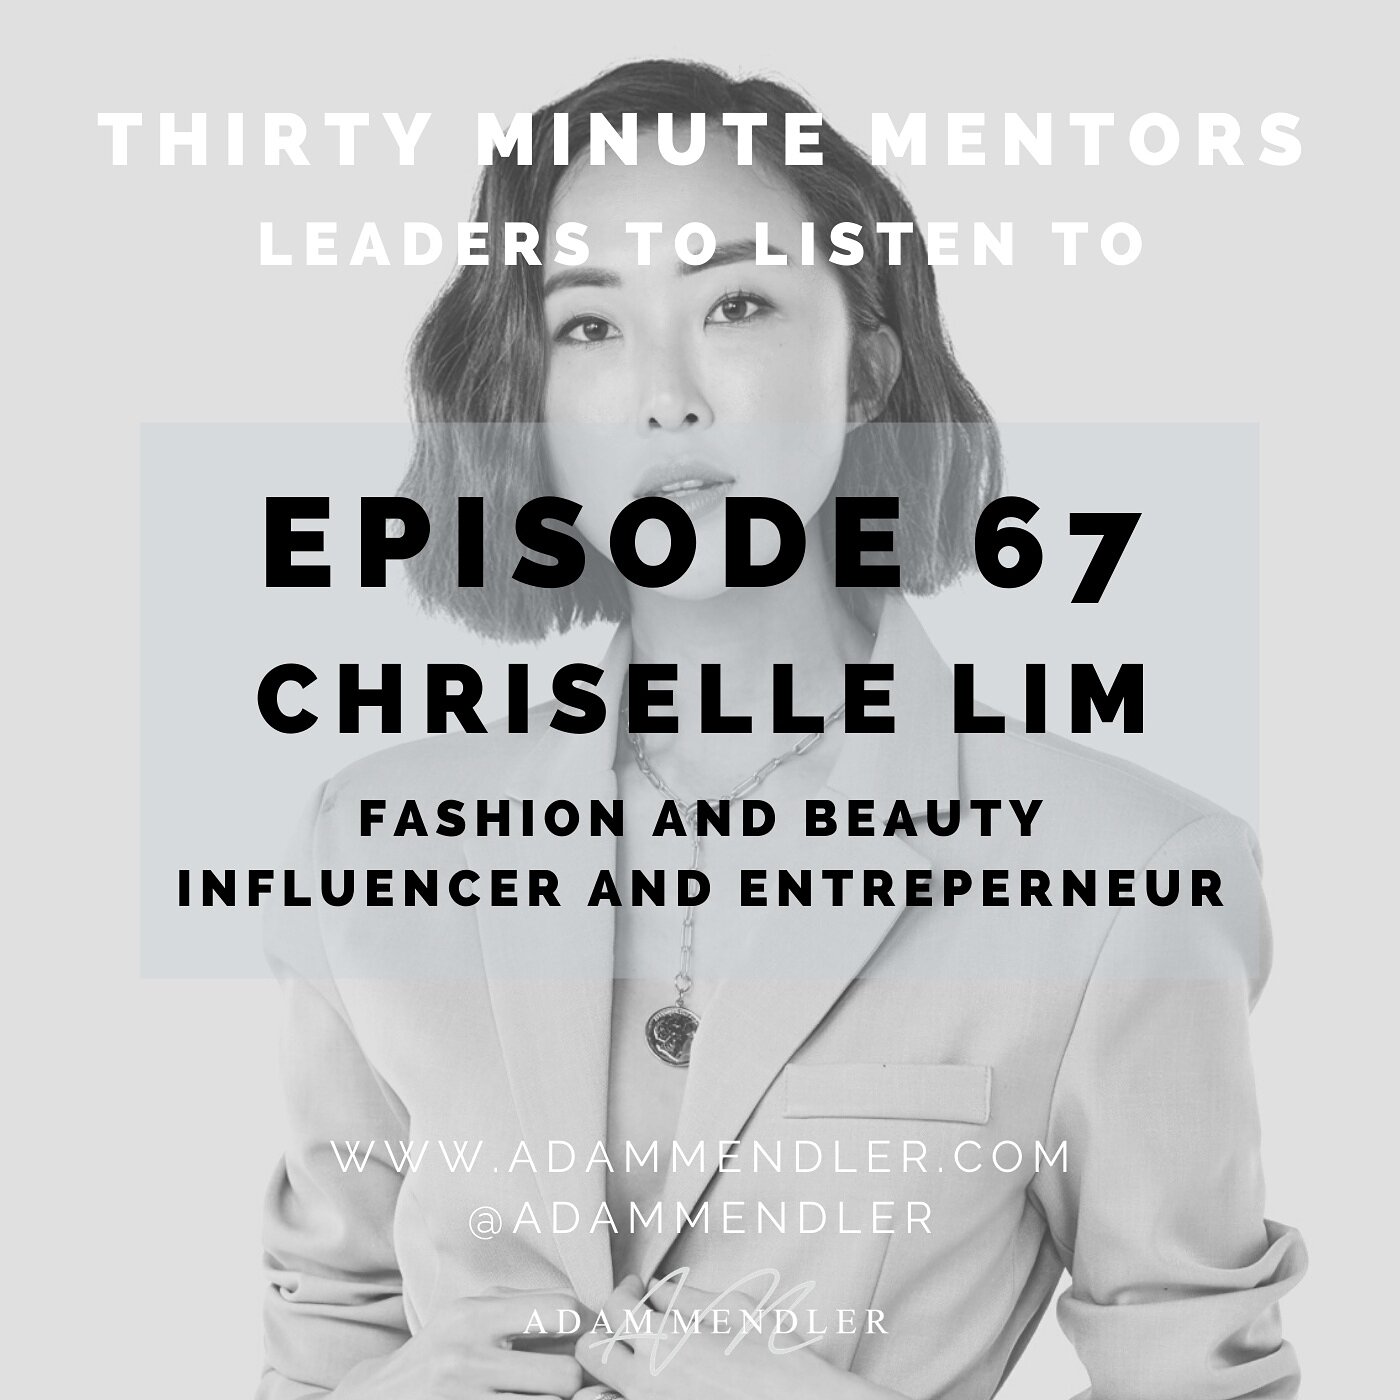 Leading fashion and beauty influencer and entrepreneur @chrisellelim joined me on Episode 67 of Thirty Minute Mentors. We covered a wide range of topics: how to pursue a non-traditional career; how to build and grow an audience; branding and personal